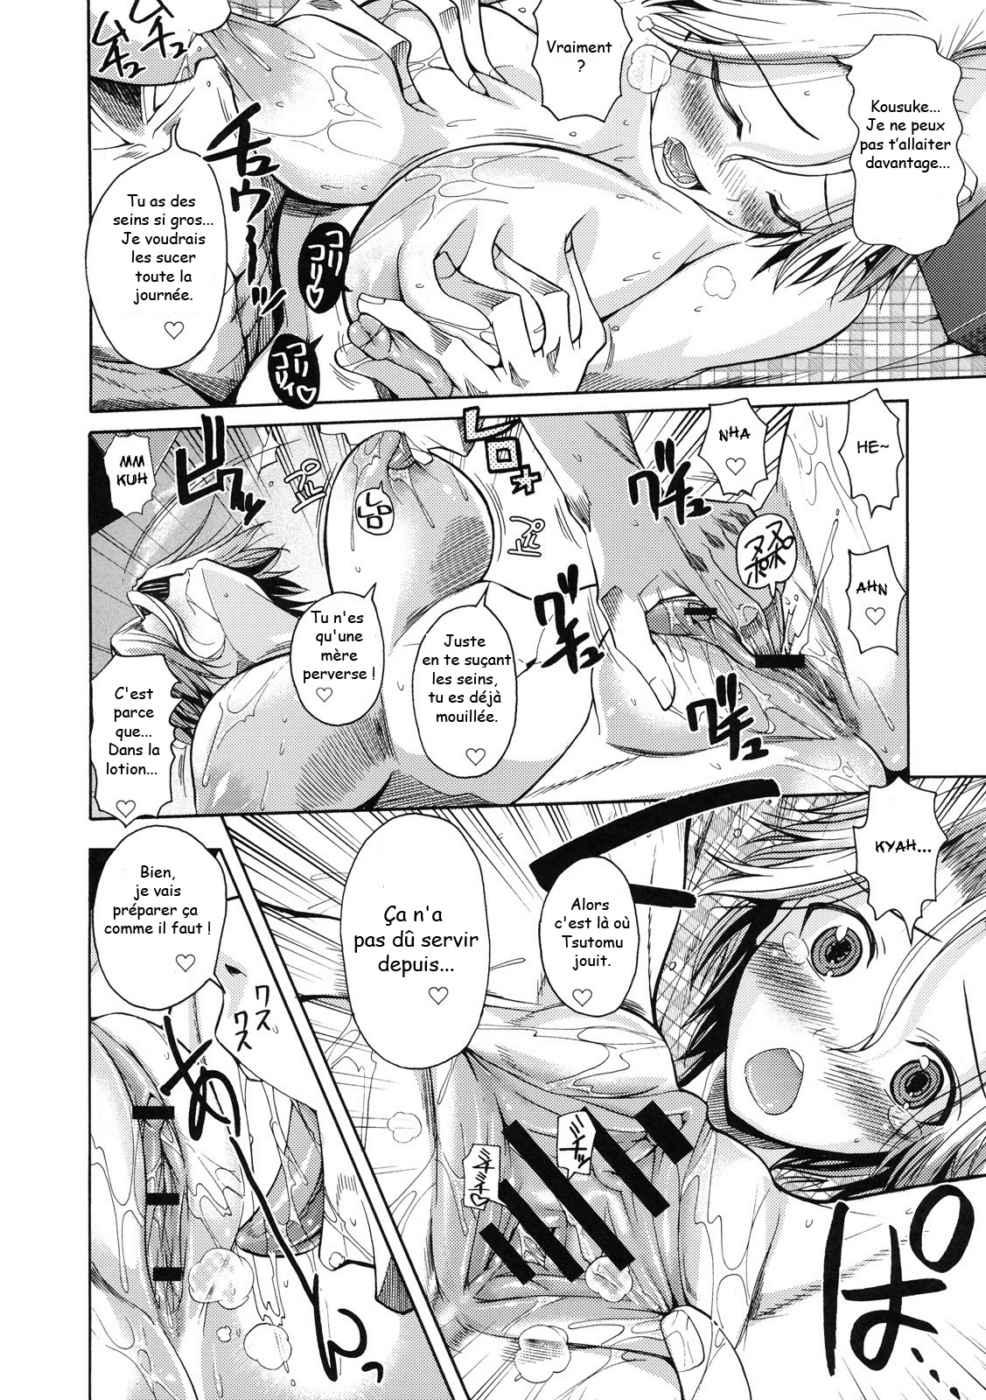 Socks GIRL FOR M - CHAPTERS (VOL1 - 8 ) (ENGLISH)  part n°1 Vietnamese - Page 11